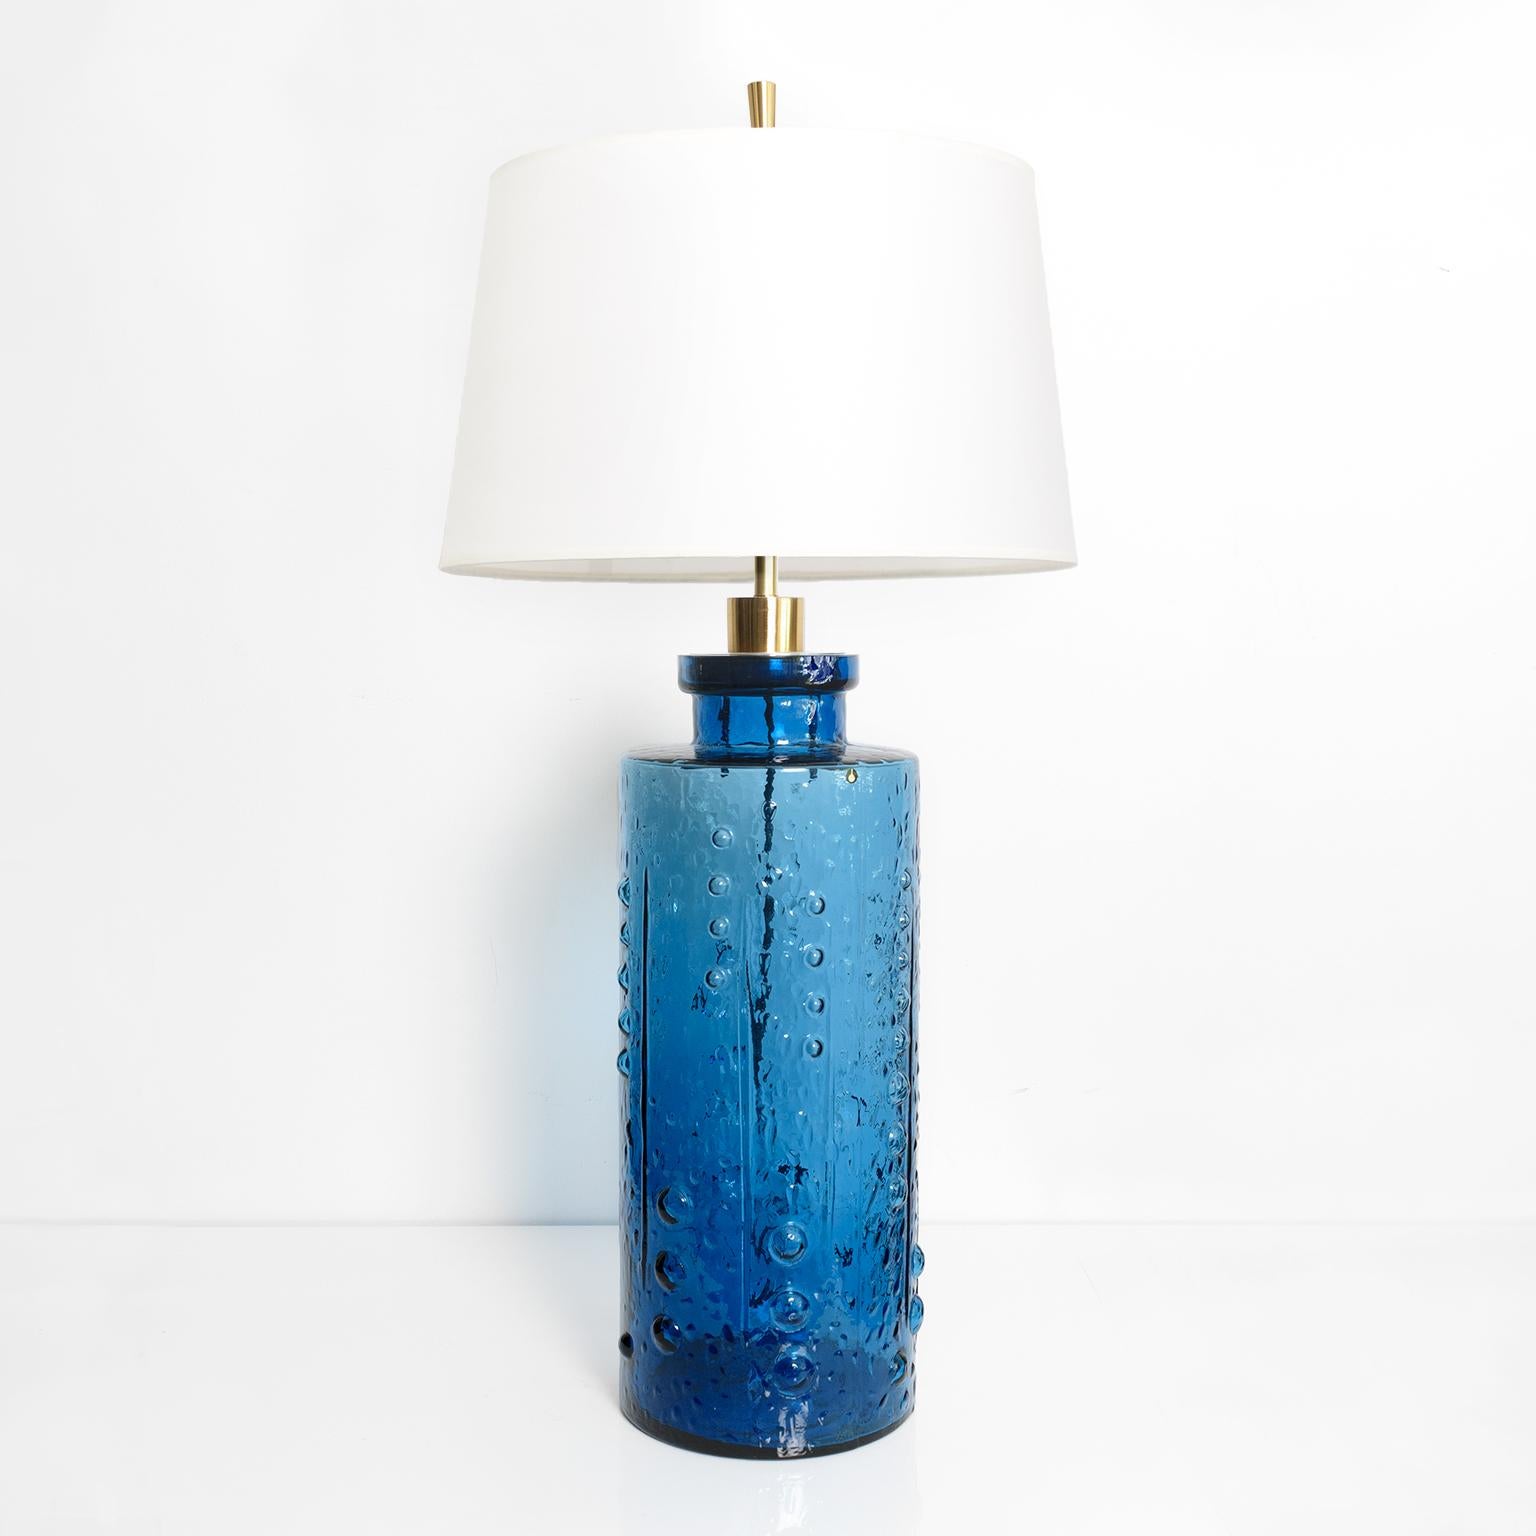 A tall deep blue Scandinavian Modern glass lamp by Pukeberg Glasbruk, Sweden, 1960’s. The cylindrical form has a textured surface of dots and vertical lines. The lamp has been new fitted with polished brass, custom hardware, stem and double cluster